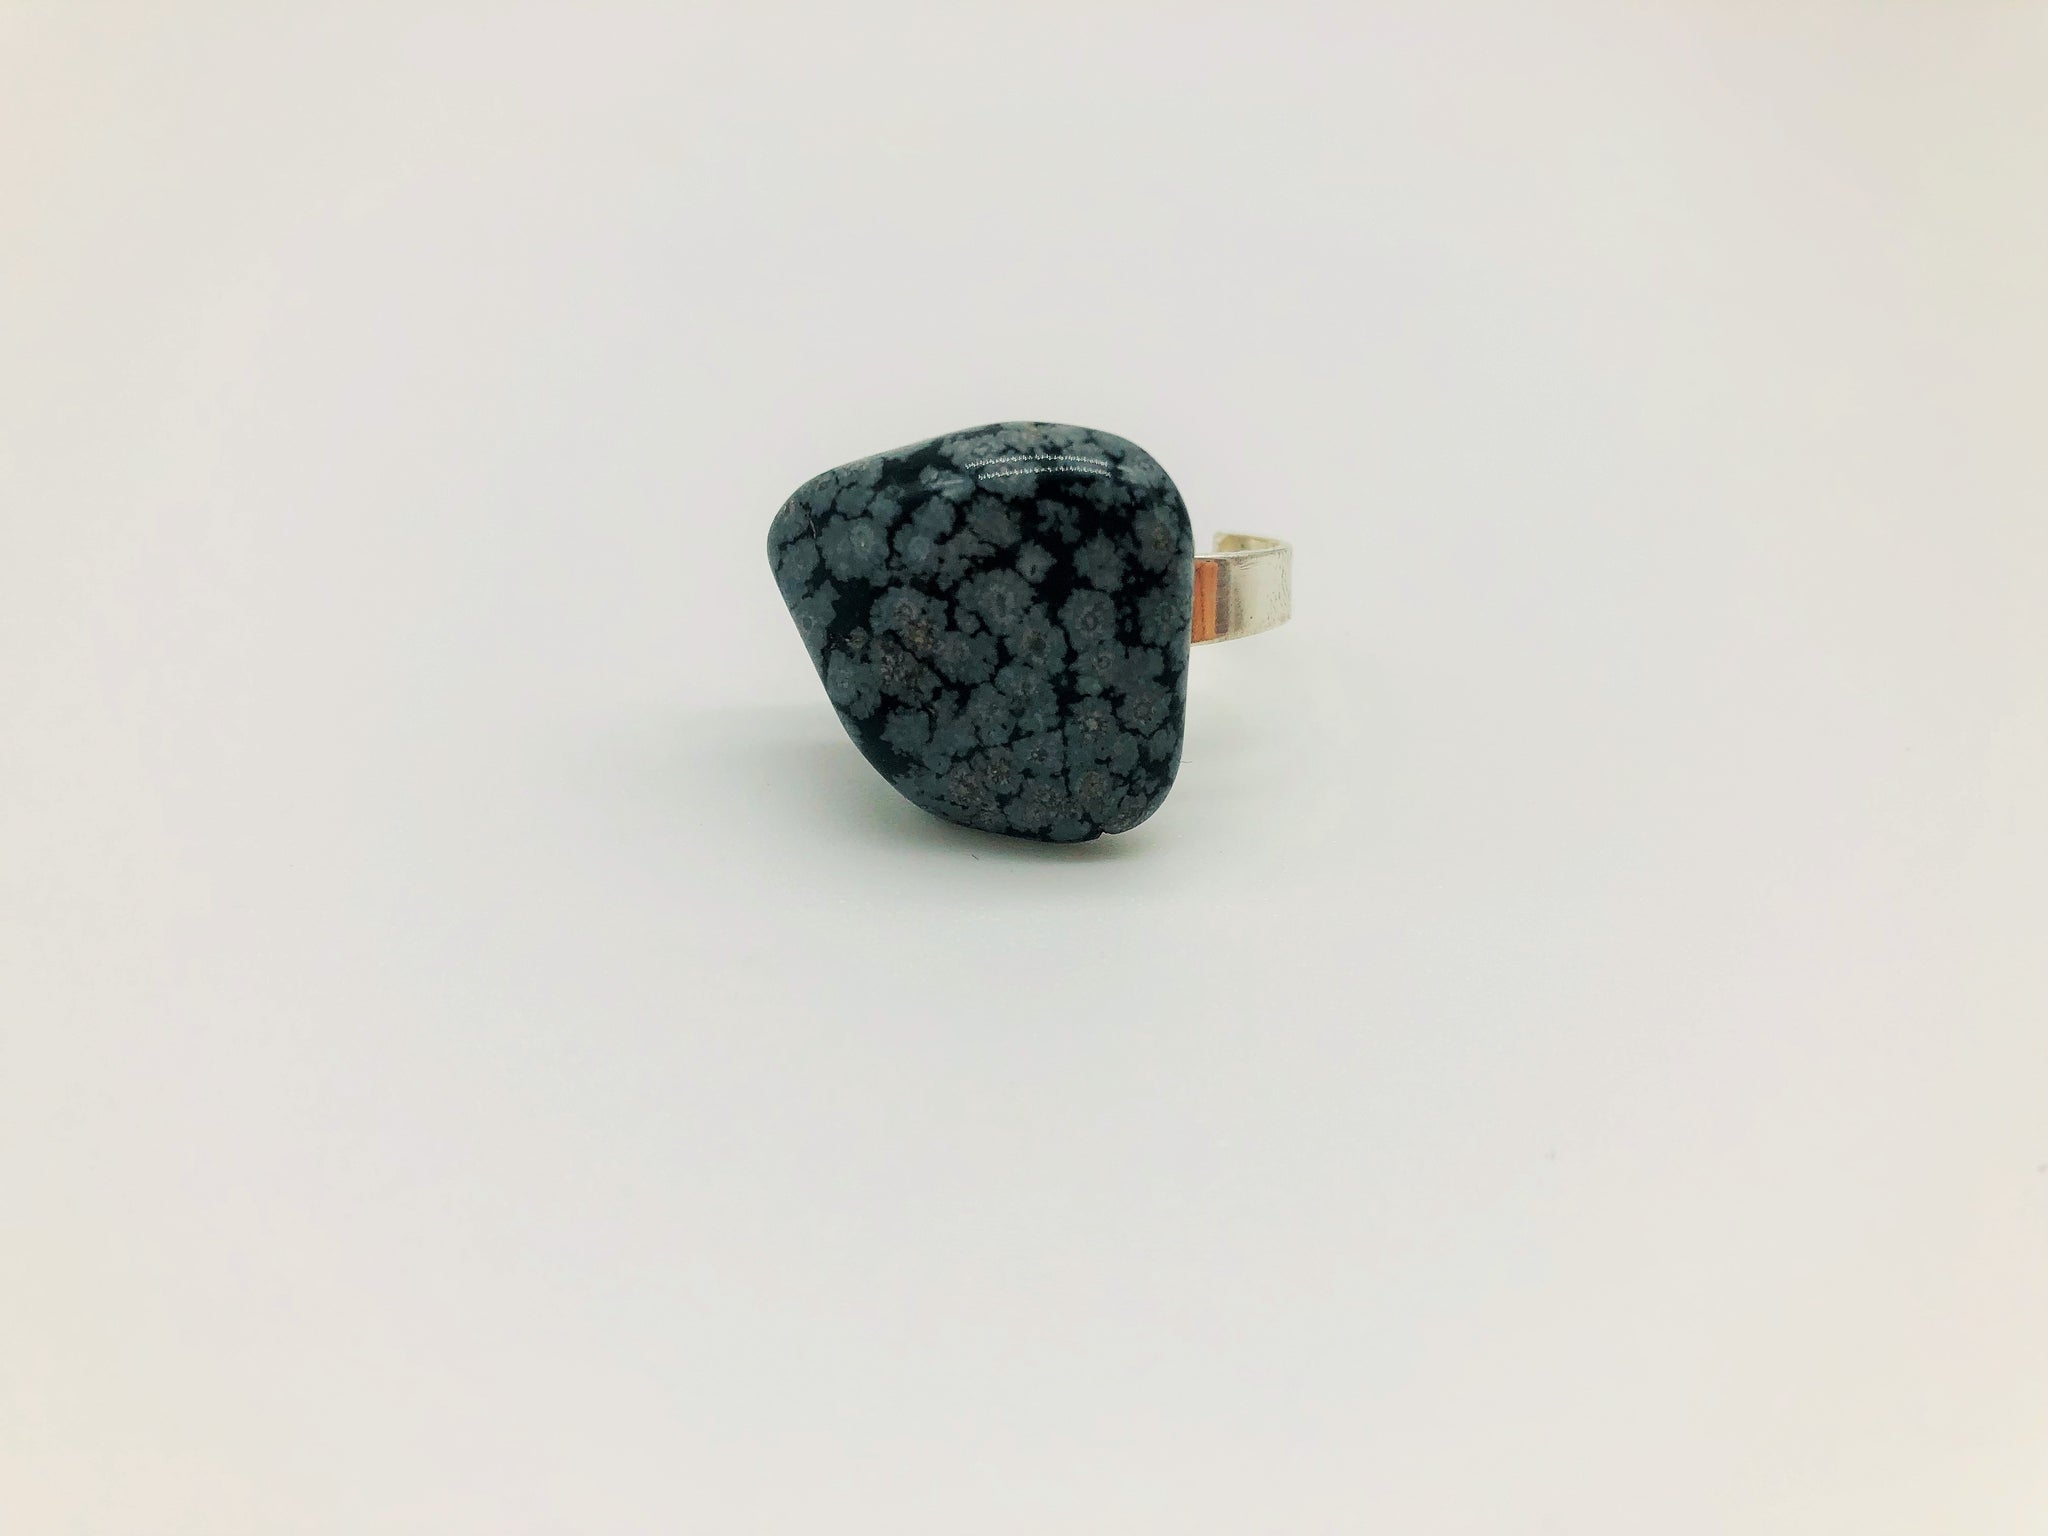 Snowflake Obsidian Holistic Healing Ring for Emotional Grounding